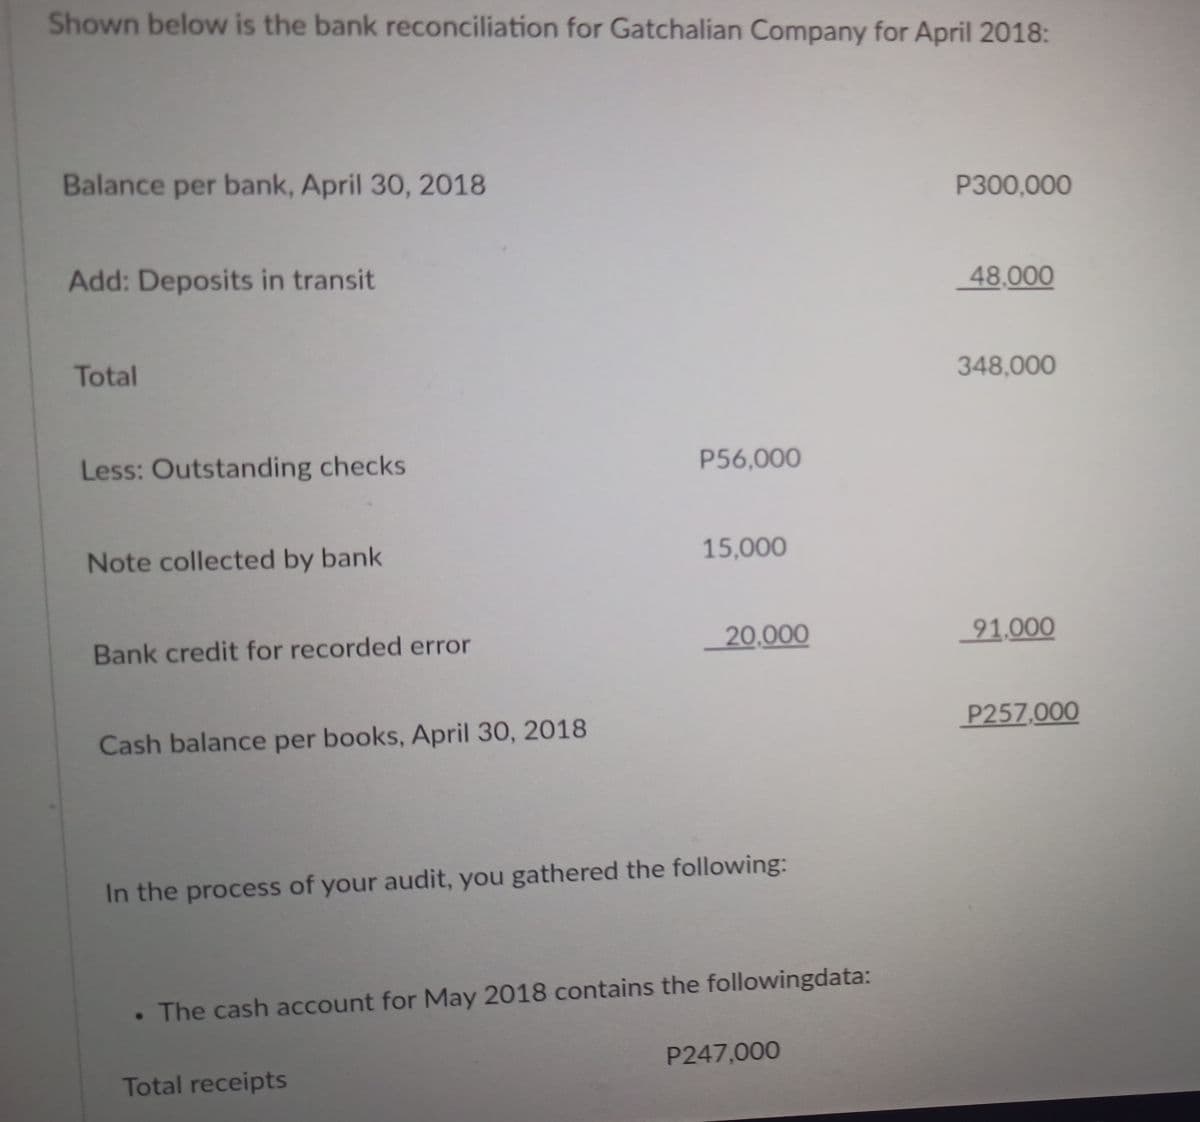 Shown below is the bank reconciliation for Gatchalian Company for April 2018:
Balance per bank, April 30, 2018
P300,000
Add: Deposits in transit
48,000
348,000
Total
P56,000
Less: Outstanding checks
15,000
Note collected by bank
20,000
91,000
Bank credit for recorded error
P257,000
Cash balance per books, April 30, 2018
In the process of your audit, you gathered the following:
• The cash account for May 2018 contains the followingdata:
P247,000
Total receipts
